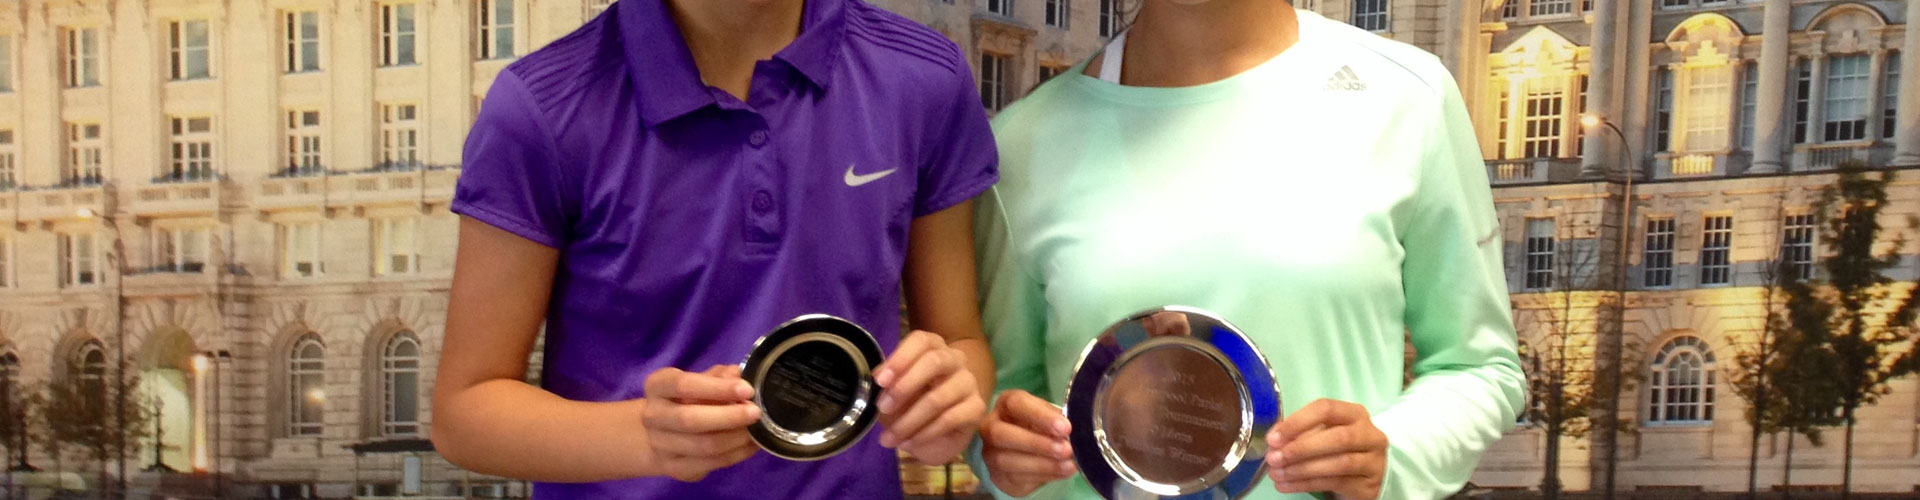 Players holding Tennis trophies